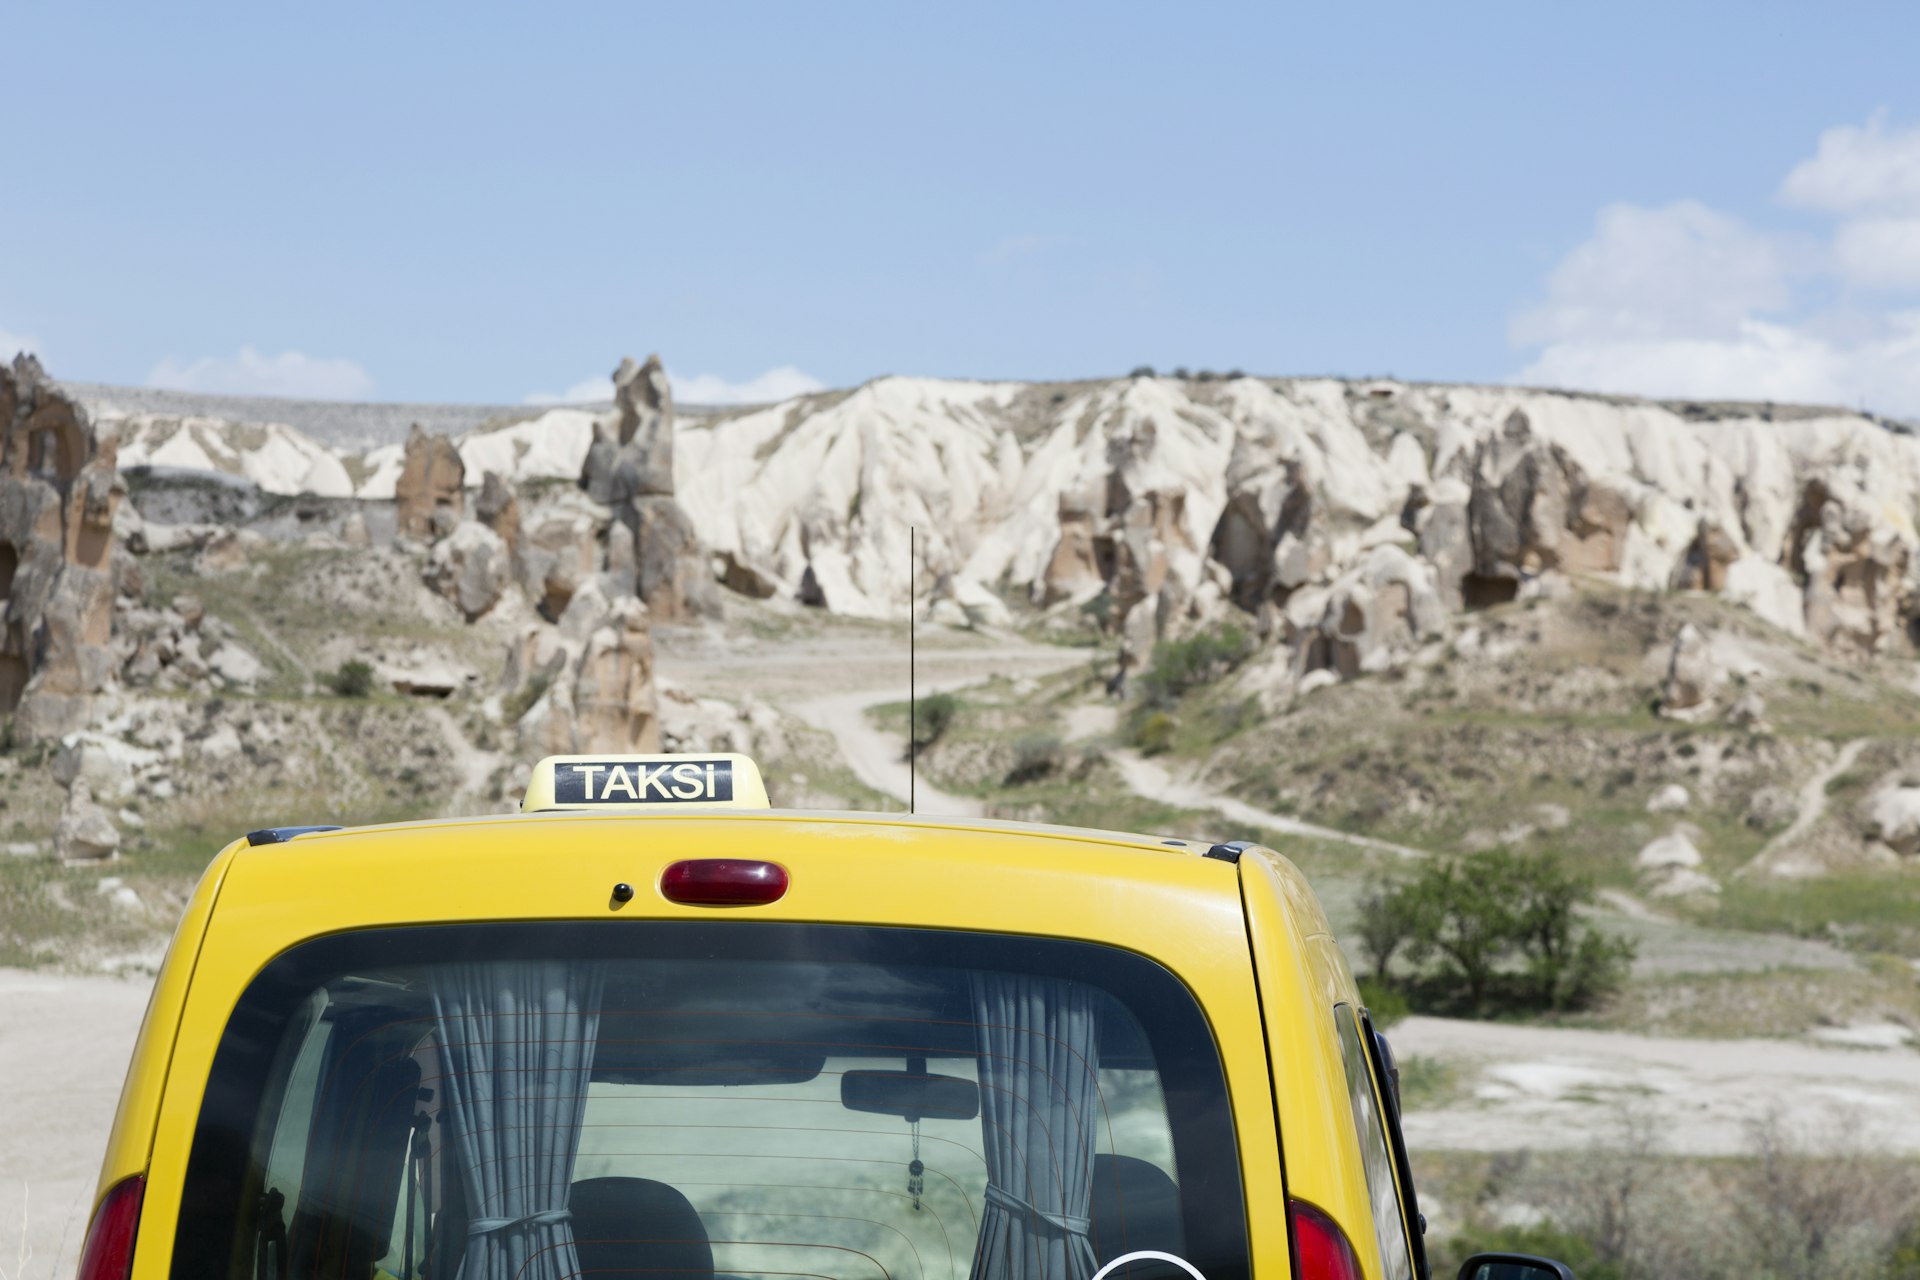 A taxi in Goreme looking out over the Cappadocia landscape